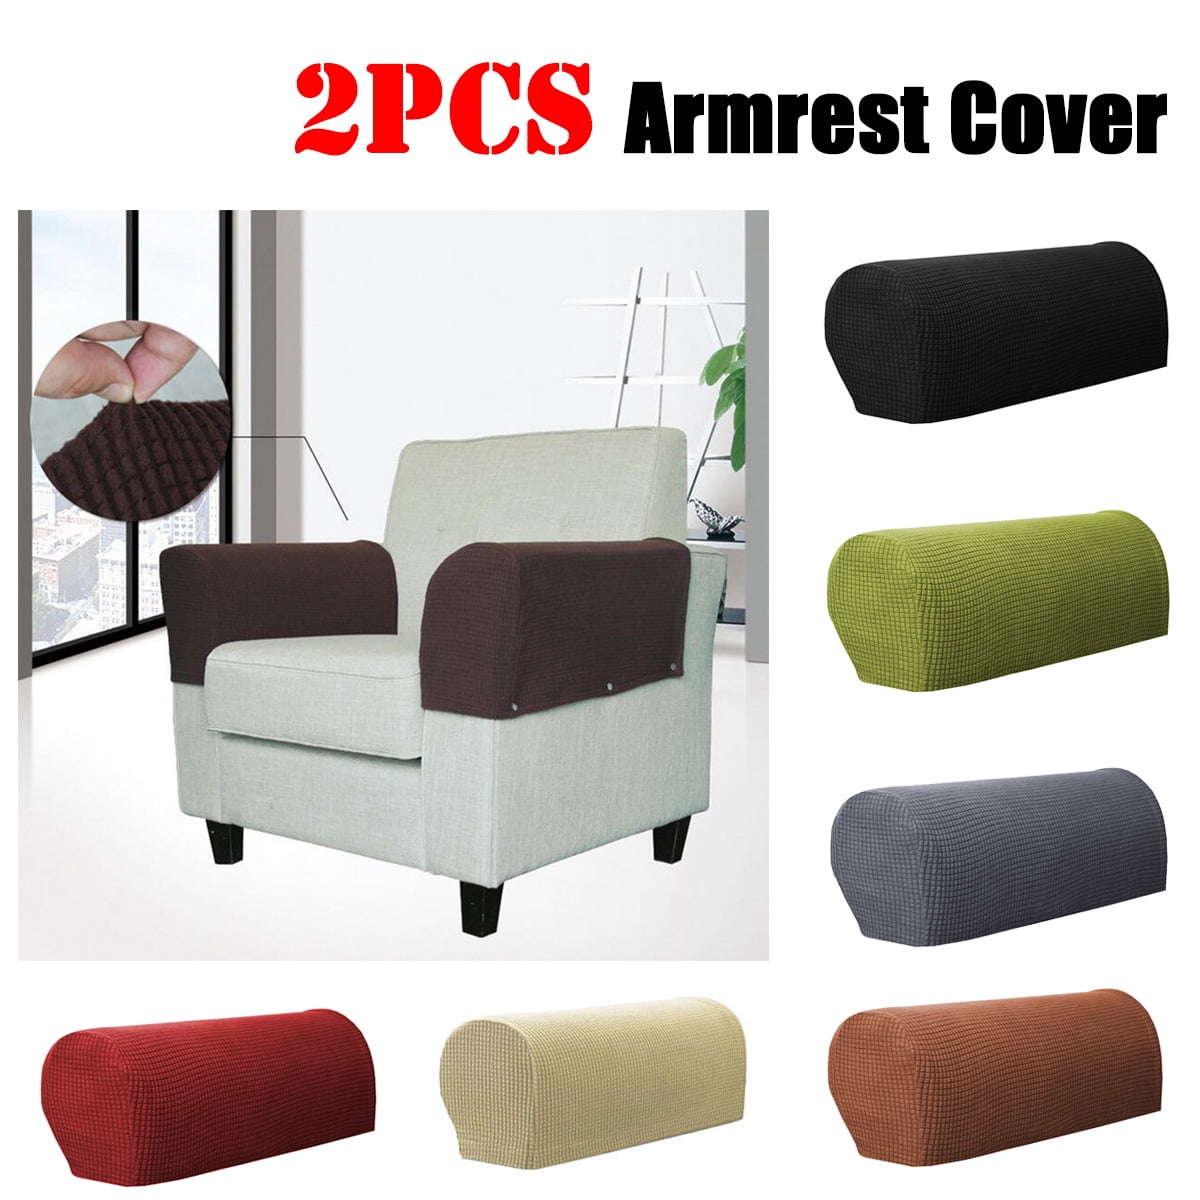 2PCS Premium Furniture Armrest Covers Stretchy Sofa Couch Chair Arm Protectors 